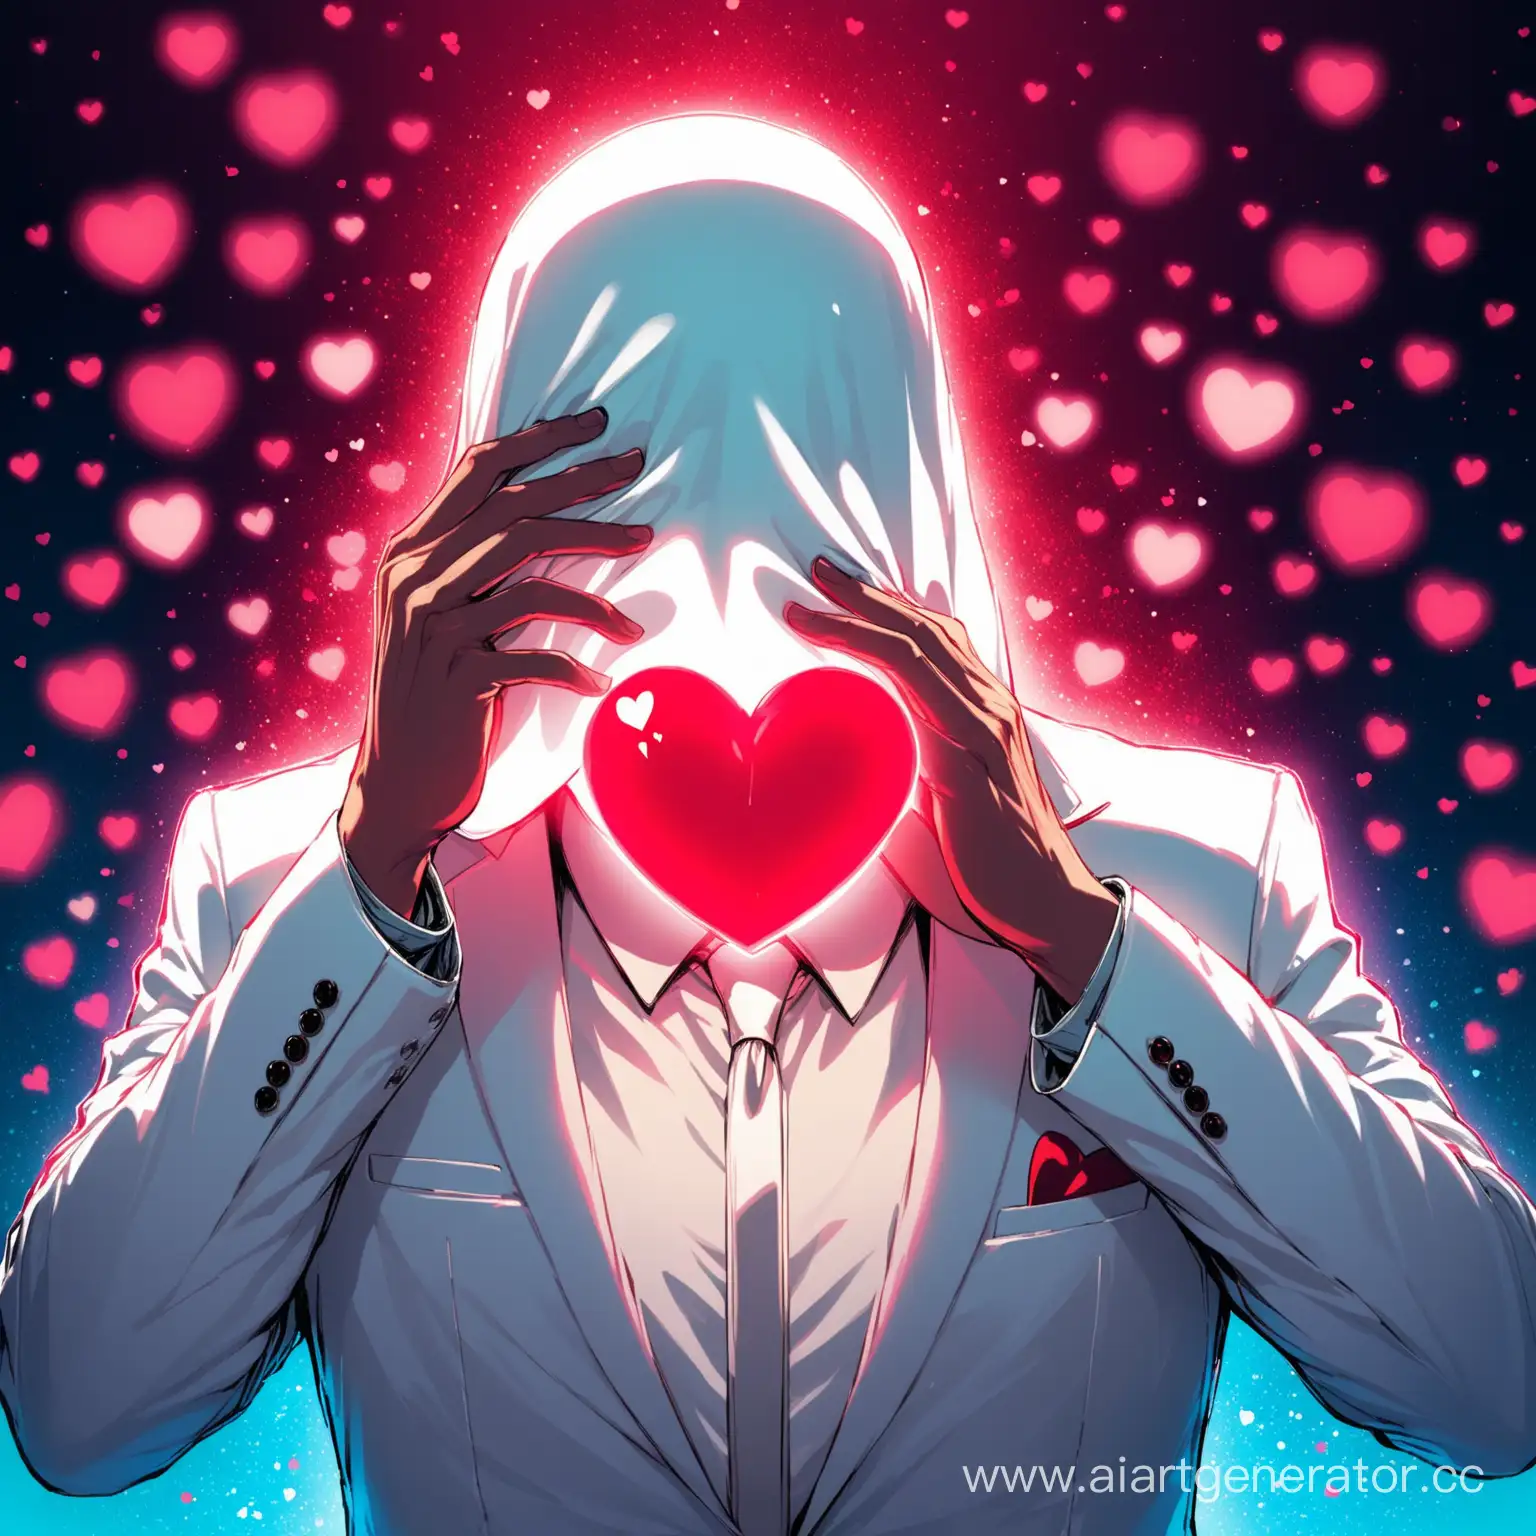 Mysterious-Figure-in-White-Suit-with-Glowing-Heart-Mask